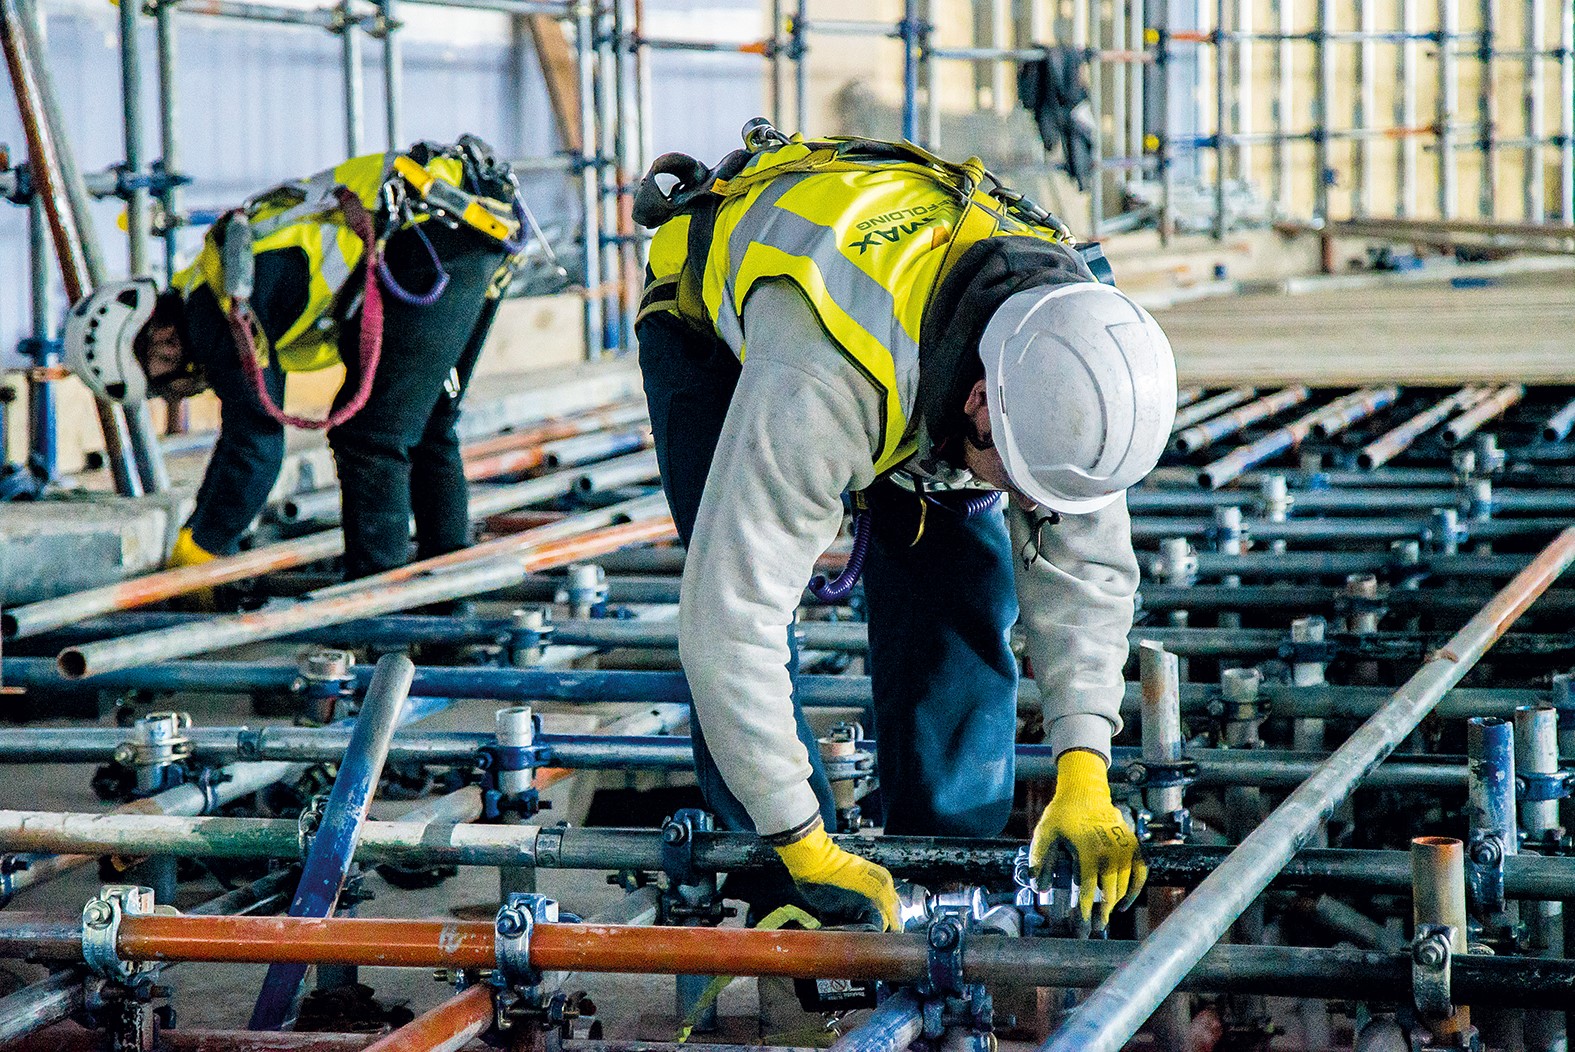 The Scaffolding Association is concerned about the impact of labour shortages on competitiveness. @Scaffold_Assoc